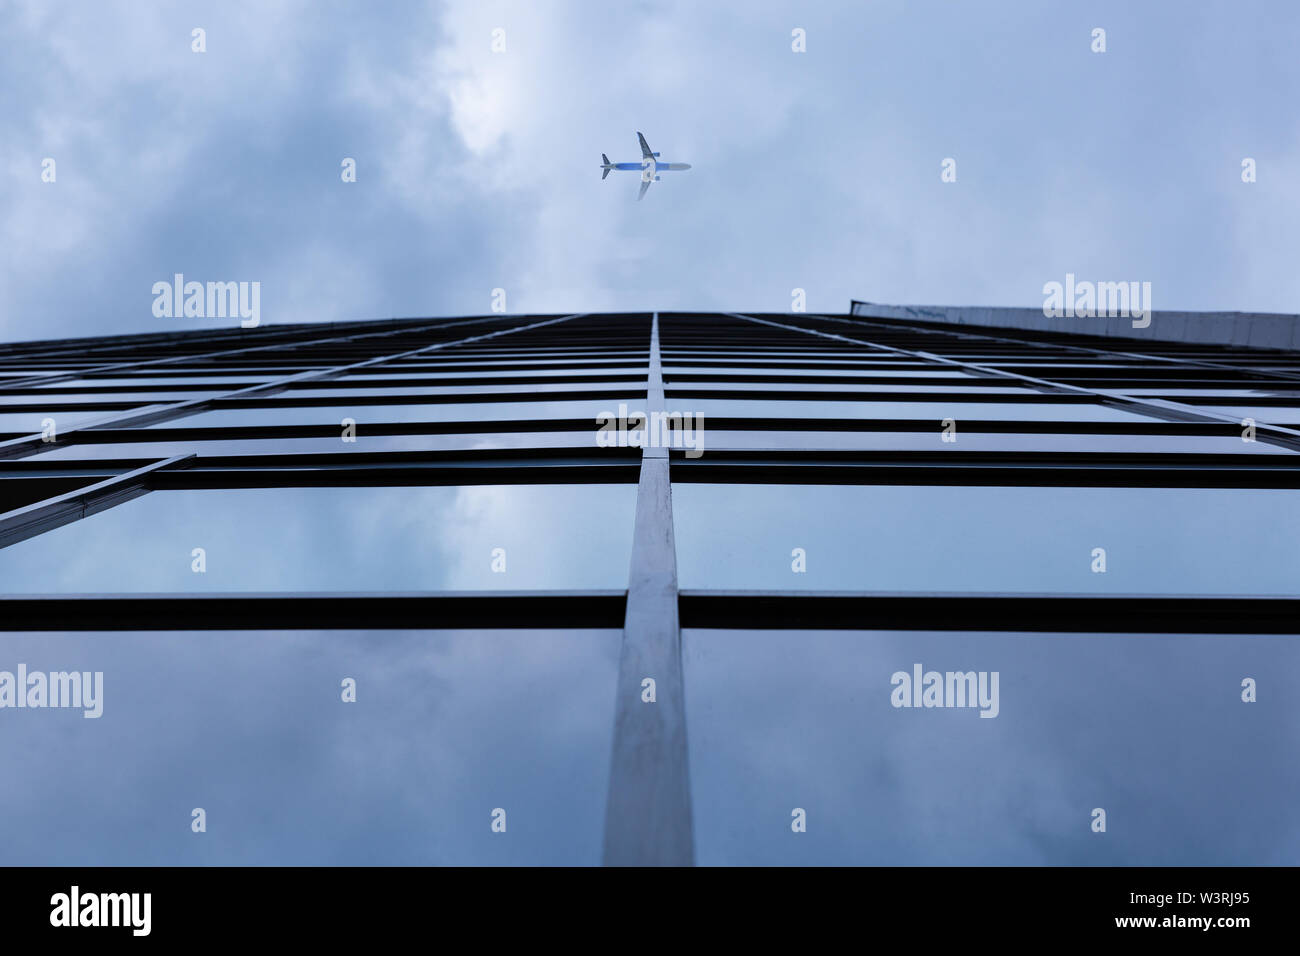 Airplane flying above modern architecture glass office building Stock Photo